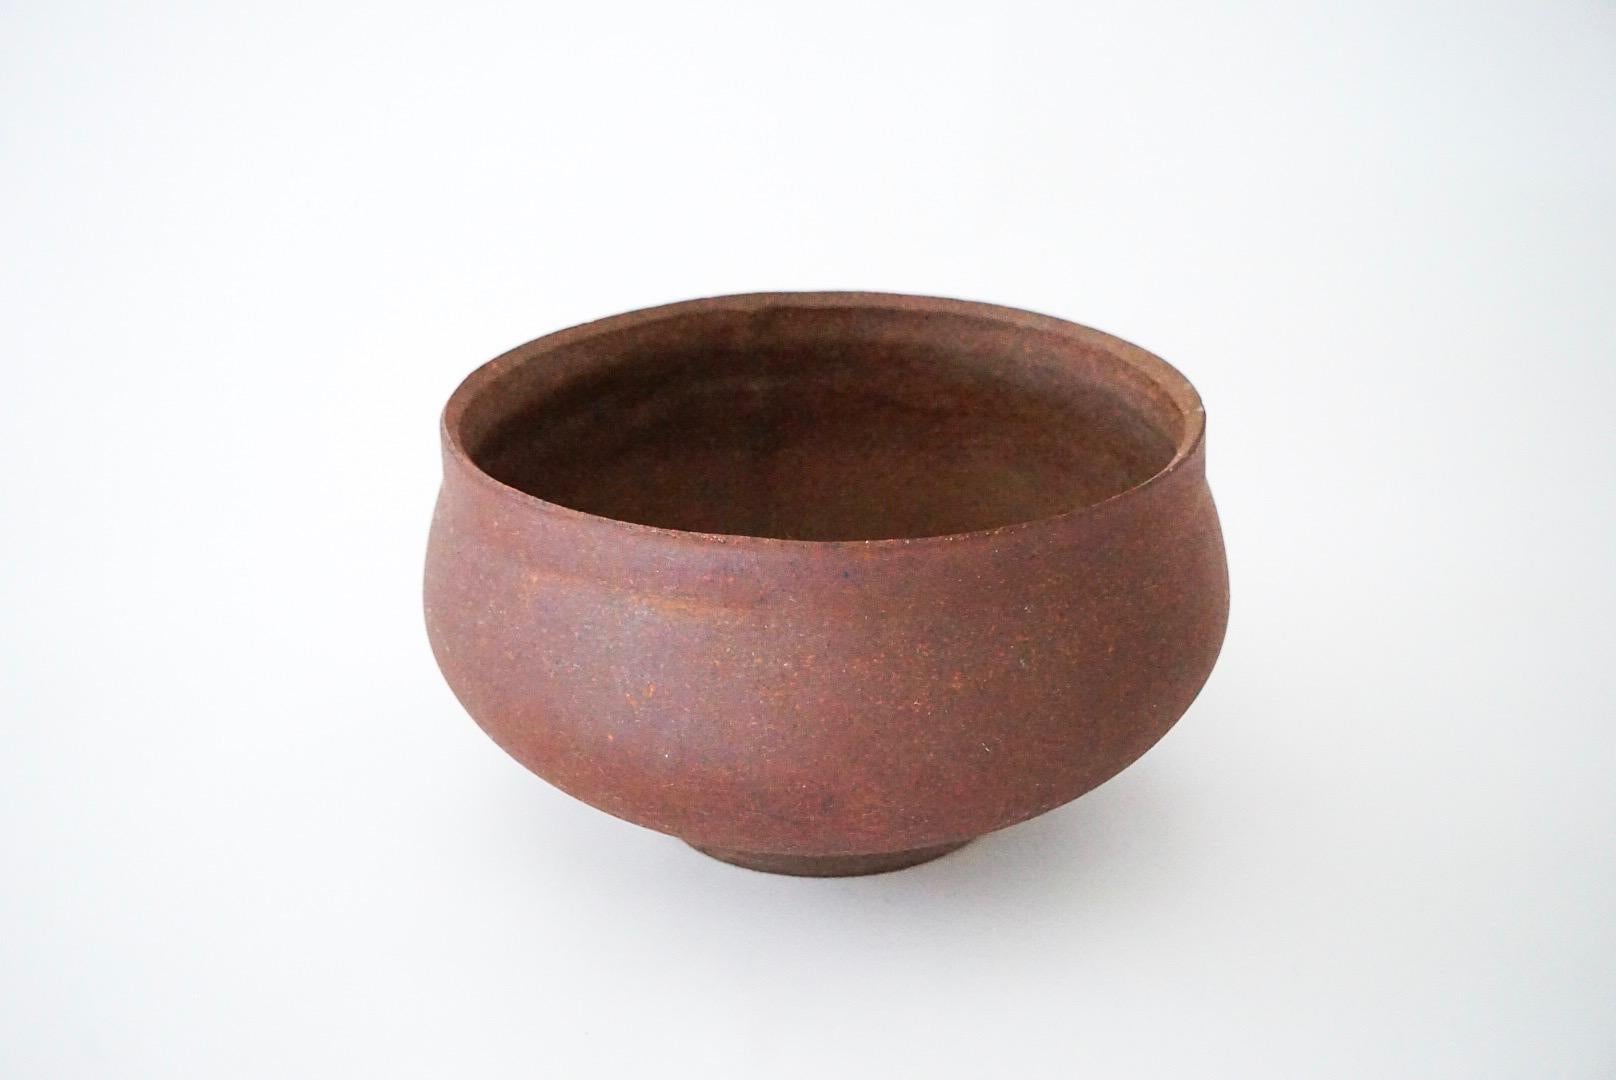 Vintage 1960s ceramic bowl / planter from David Cressey's Pro/Artisan collection for Architectural Pottery. The unglazed planter has vaguely bowed sides and a flattened lip as pictured. Proper drainage hole. Small and insignificant chip as pictured